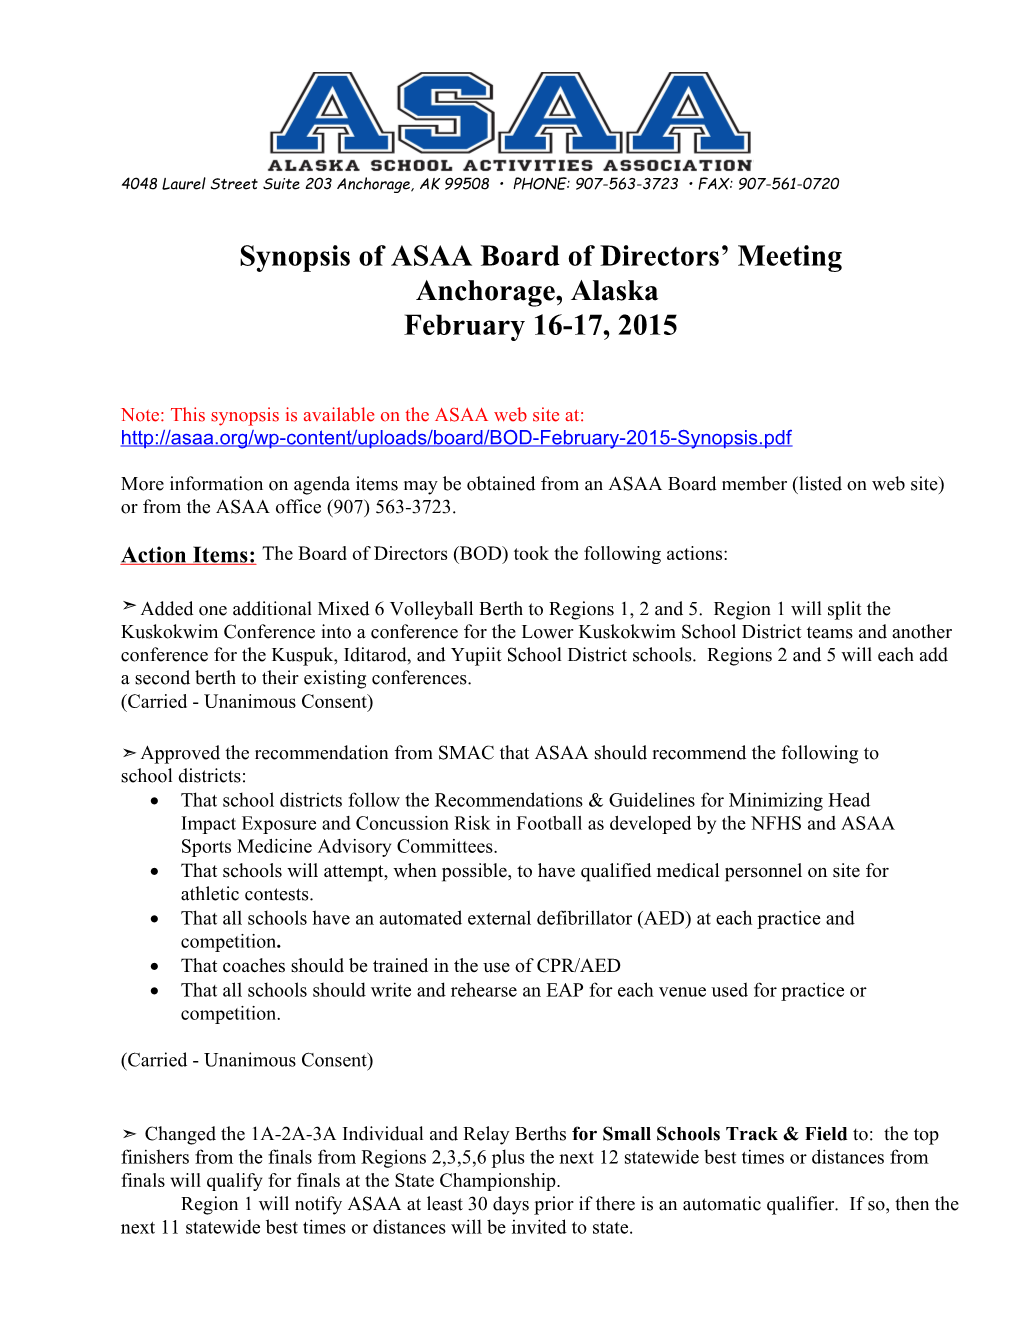 Synopsis of ASAA Board of Directors Meeting